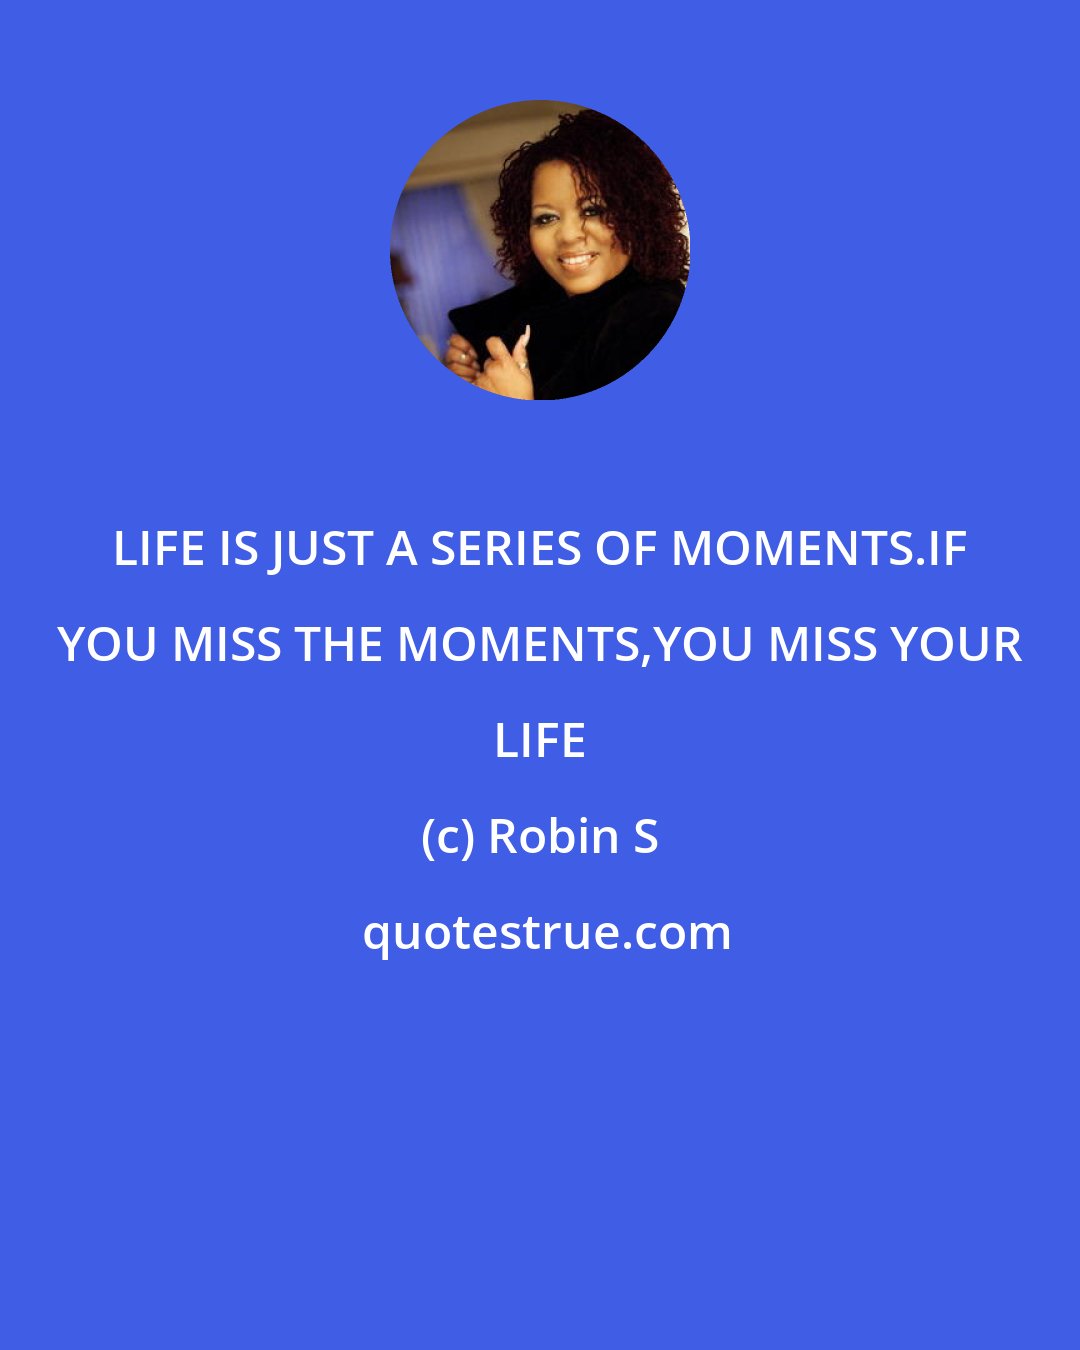 Robin S: LIFE IS JUST A SERIES OF MOMENTS.IF YOU MISS THE MOMENTS,YOU MISS YOUR LIFE